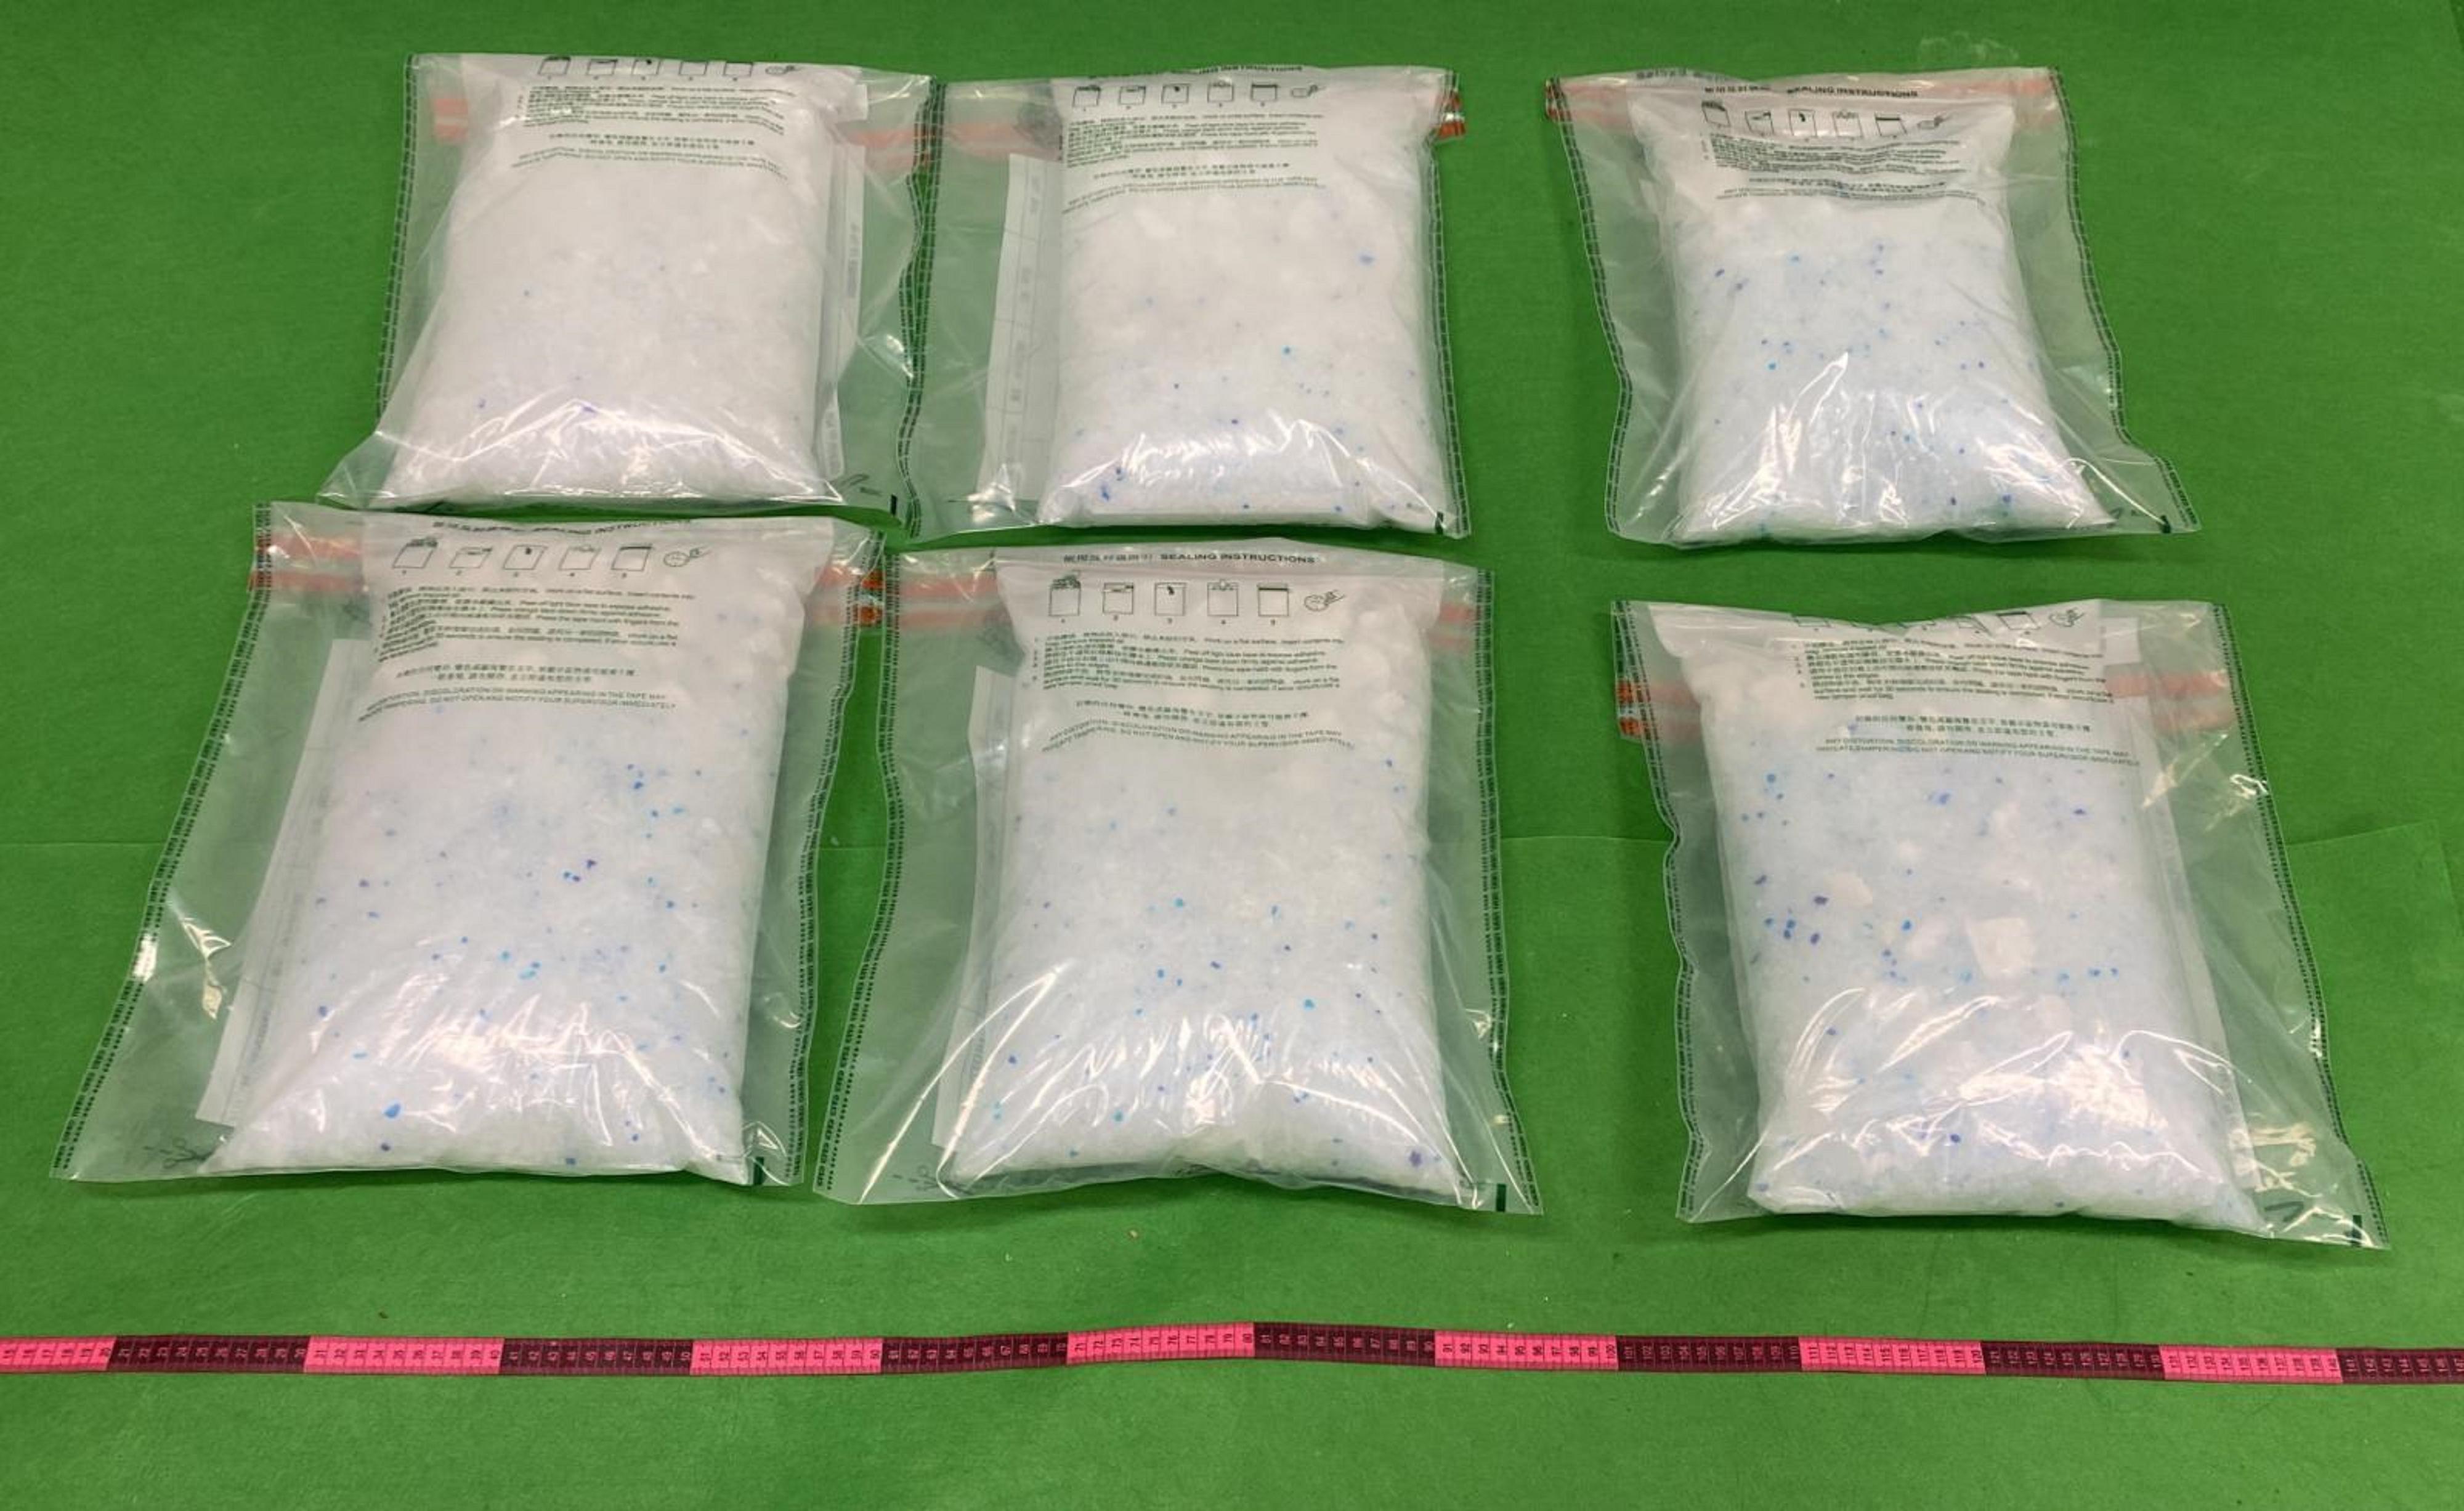 Hong Kong Customs detected three dangerous drugs cases on December 2, 6 and 13, and seized about 8.5 kilograms of suspected ketamine with a total estimated market value of about $4.9 million at Hong Kong International Airport and Tsing Yi. Photo shows the suspected ketamine seized by Customs officers in the second and third cases.